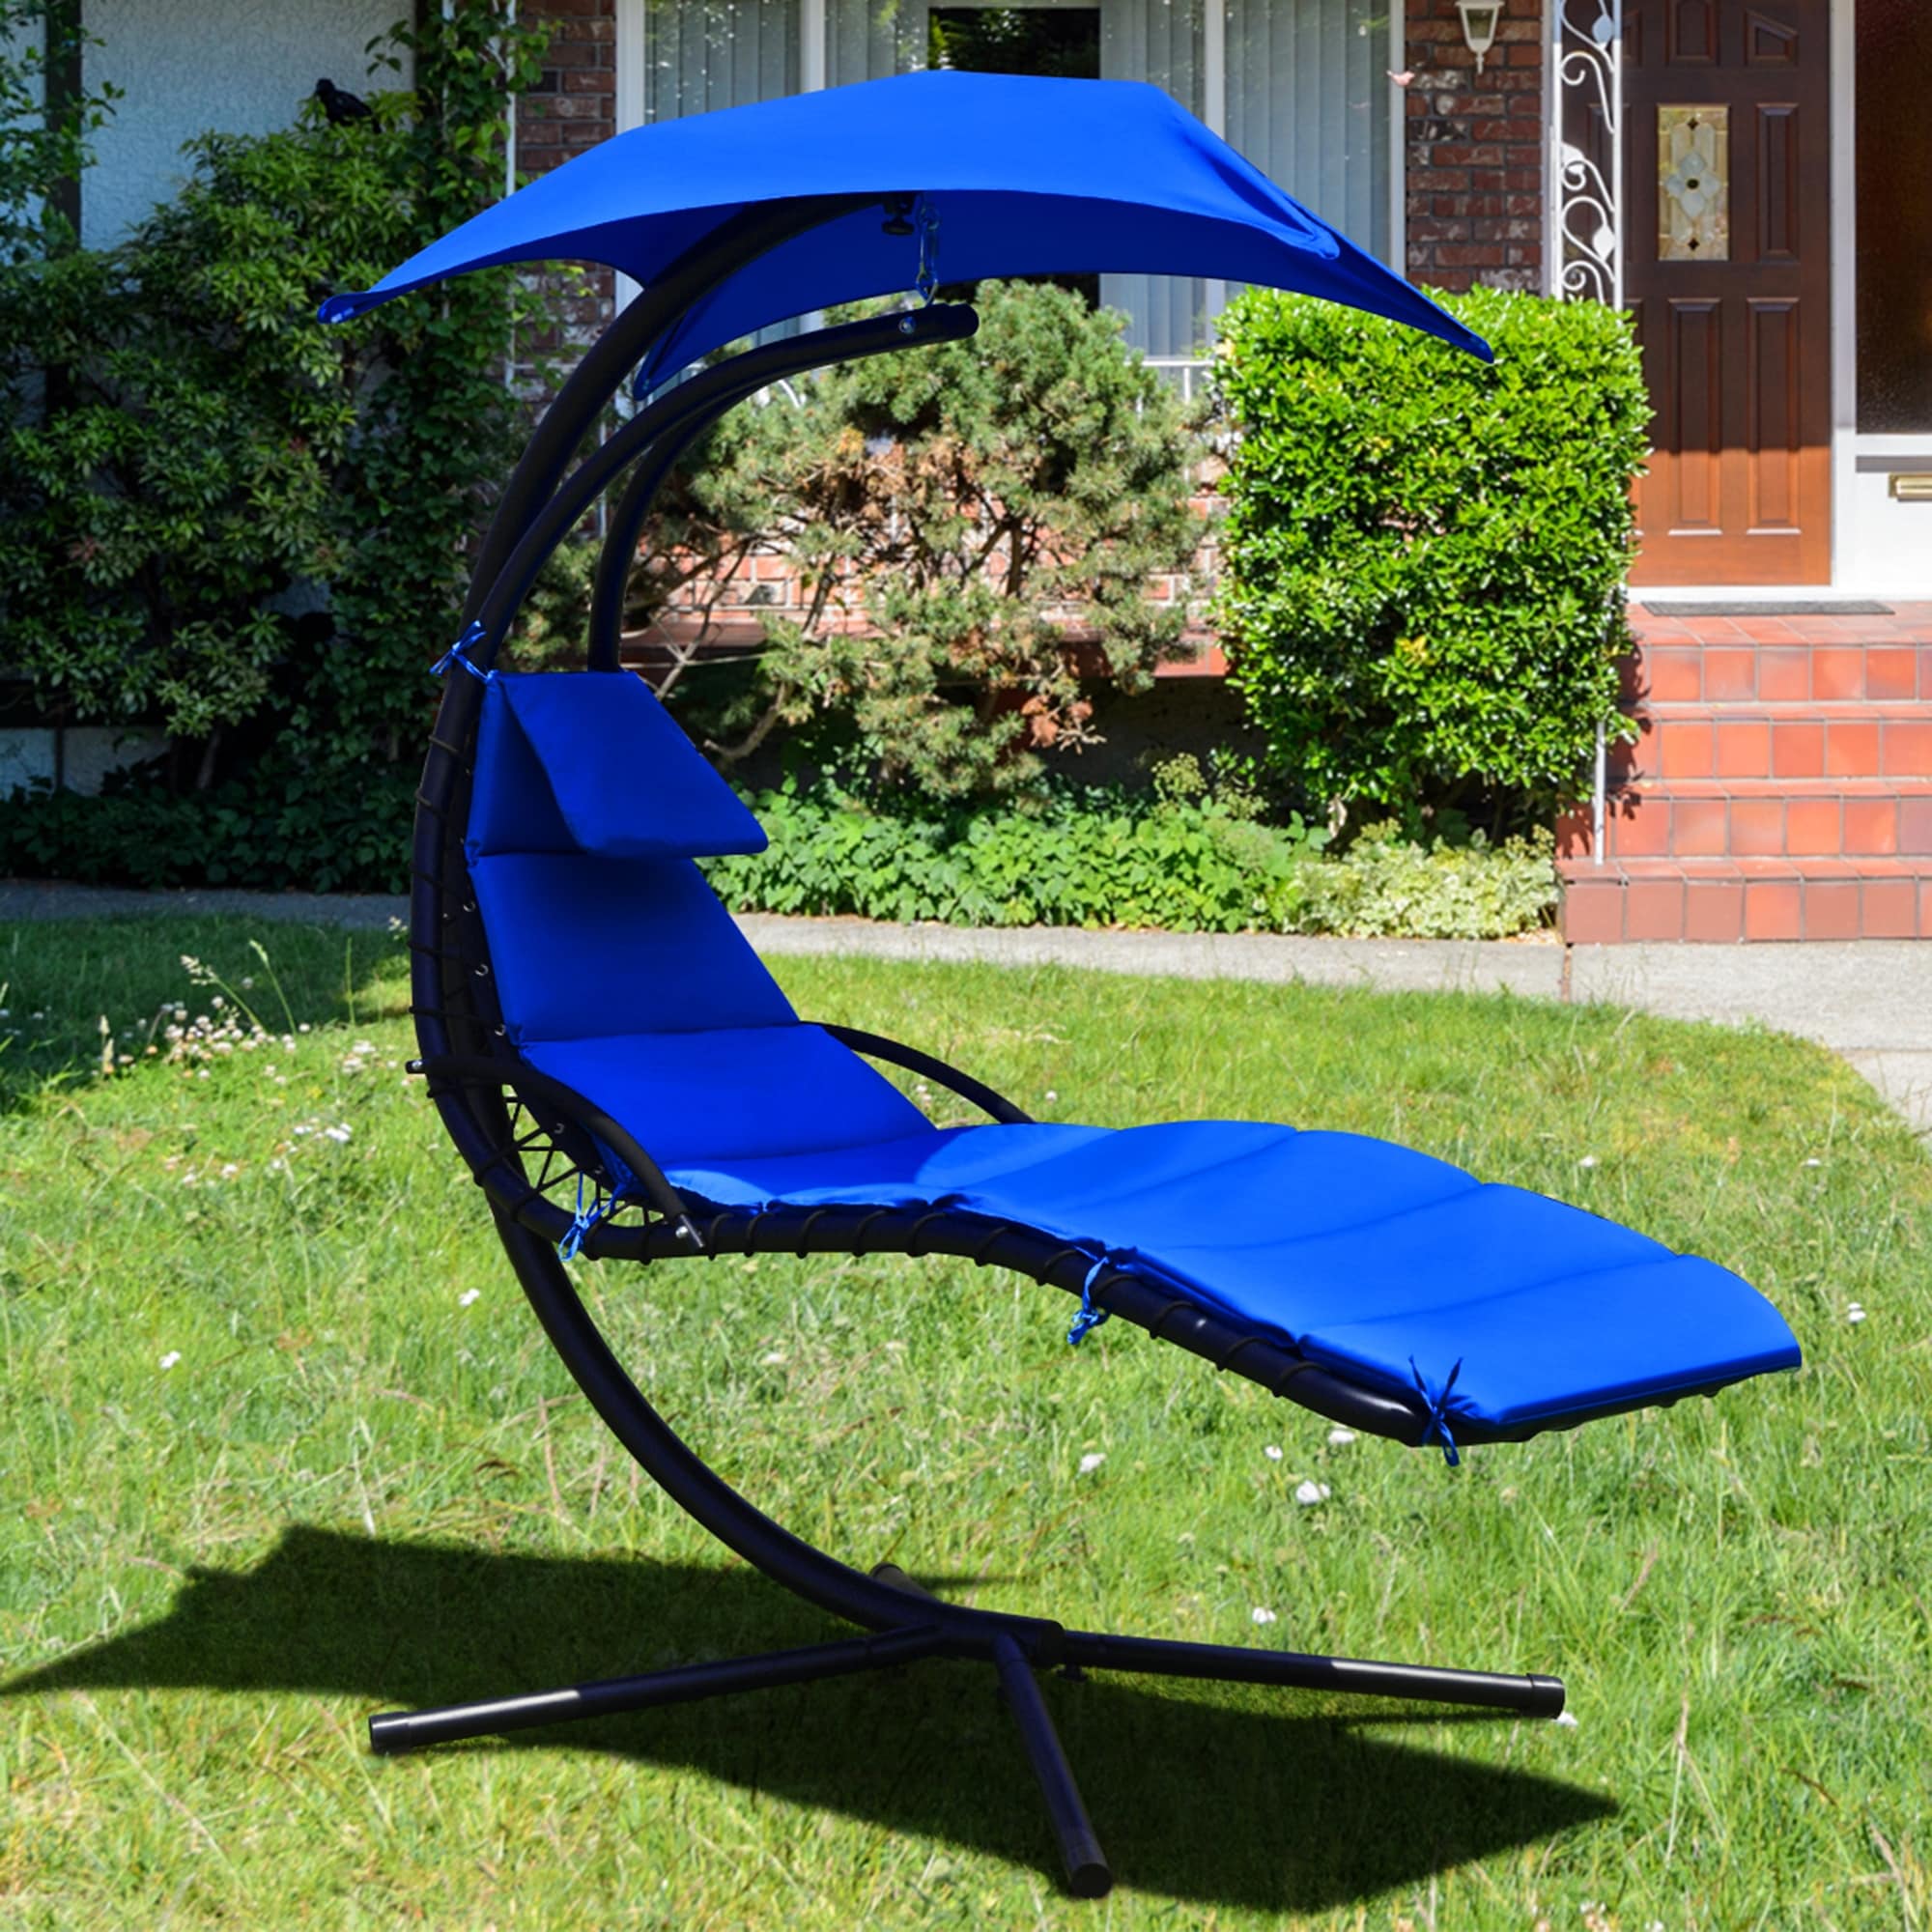 Gymax Patio Hammock Swing Chair Hanging Chaise w/ Cushion Pillow - Navy